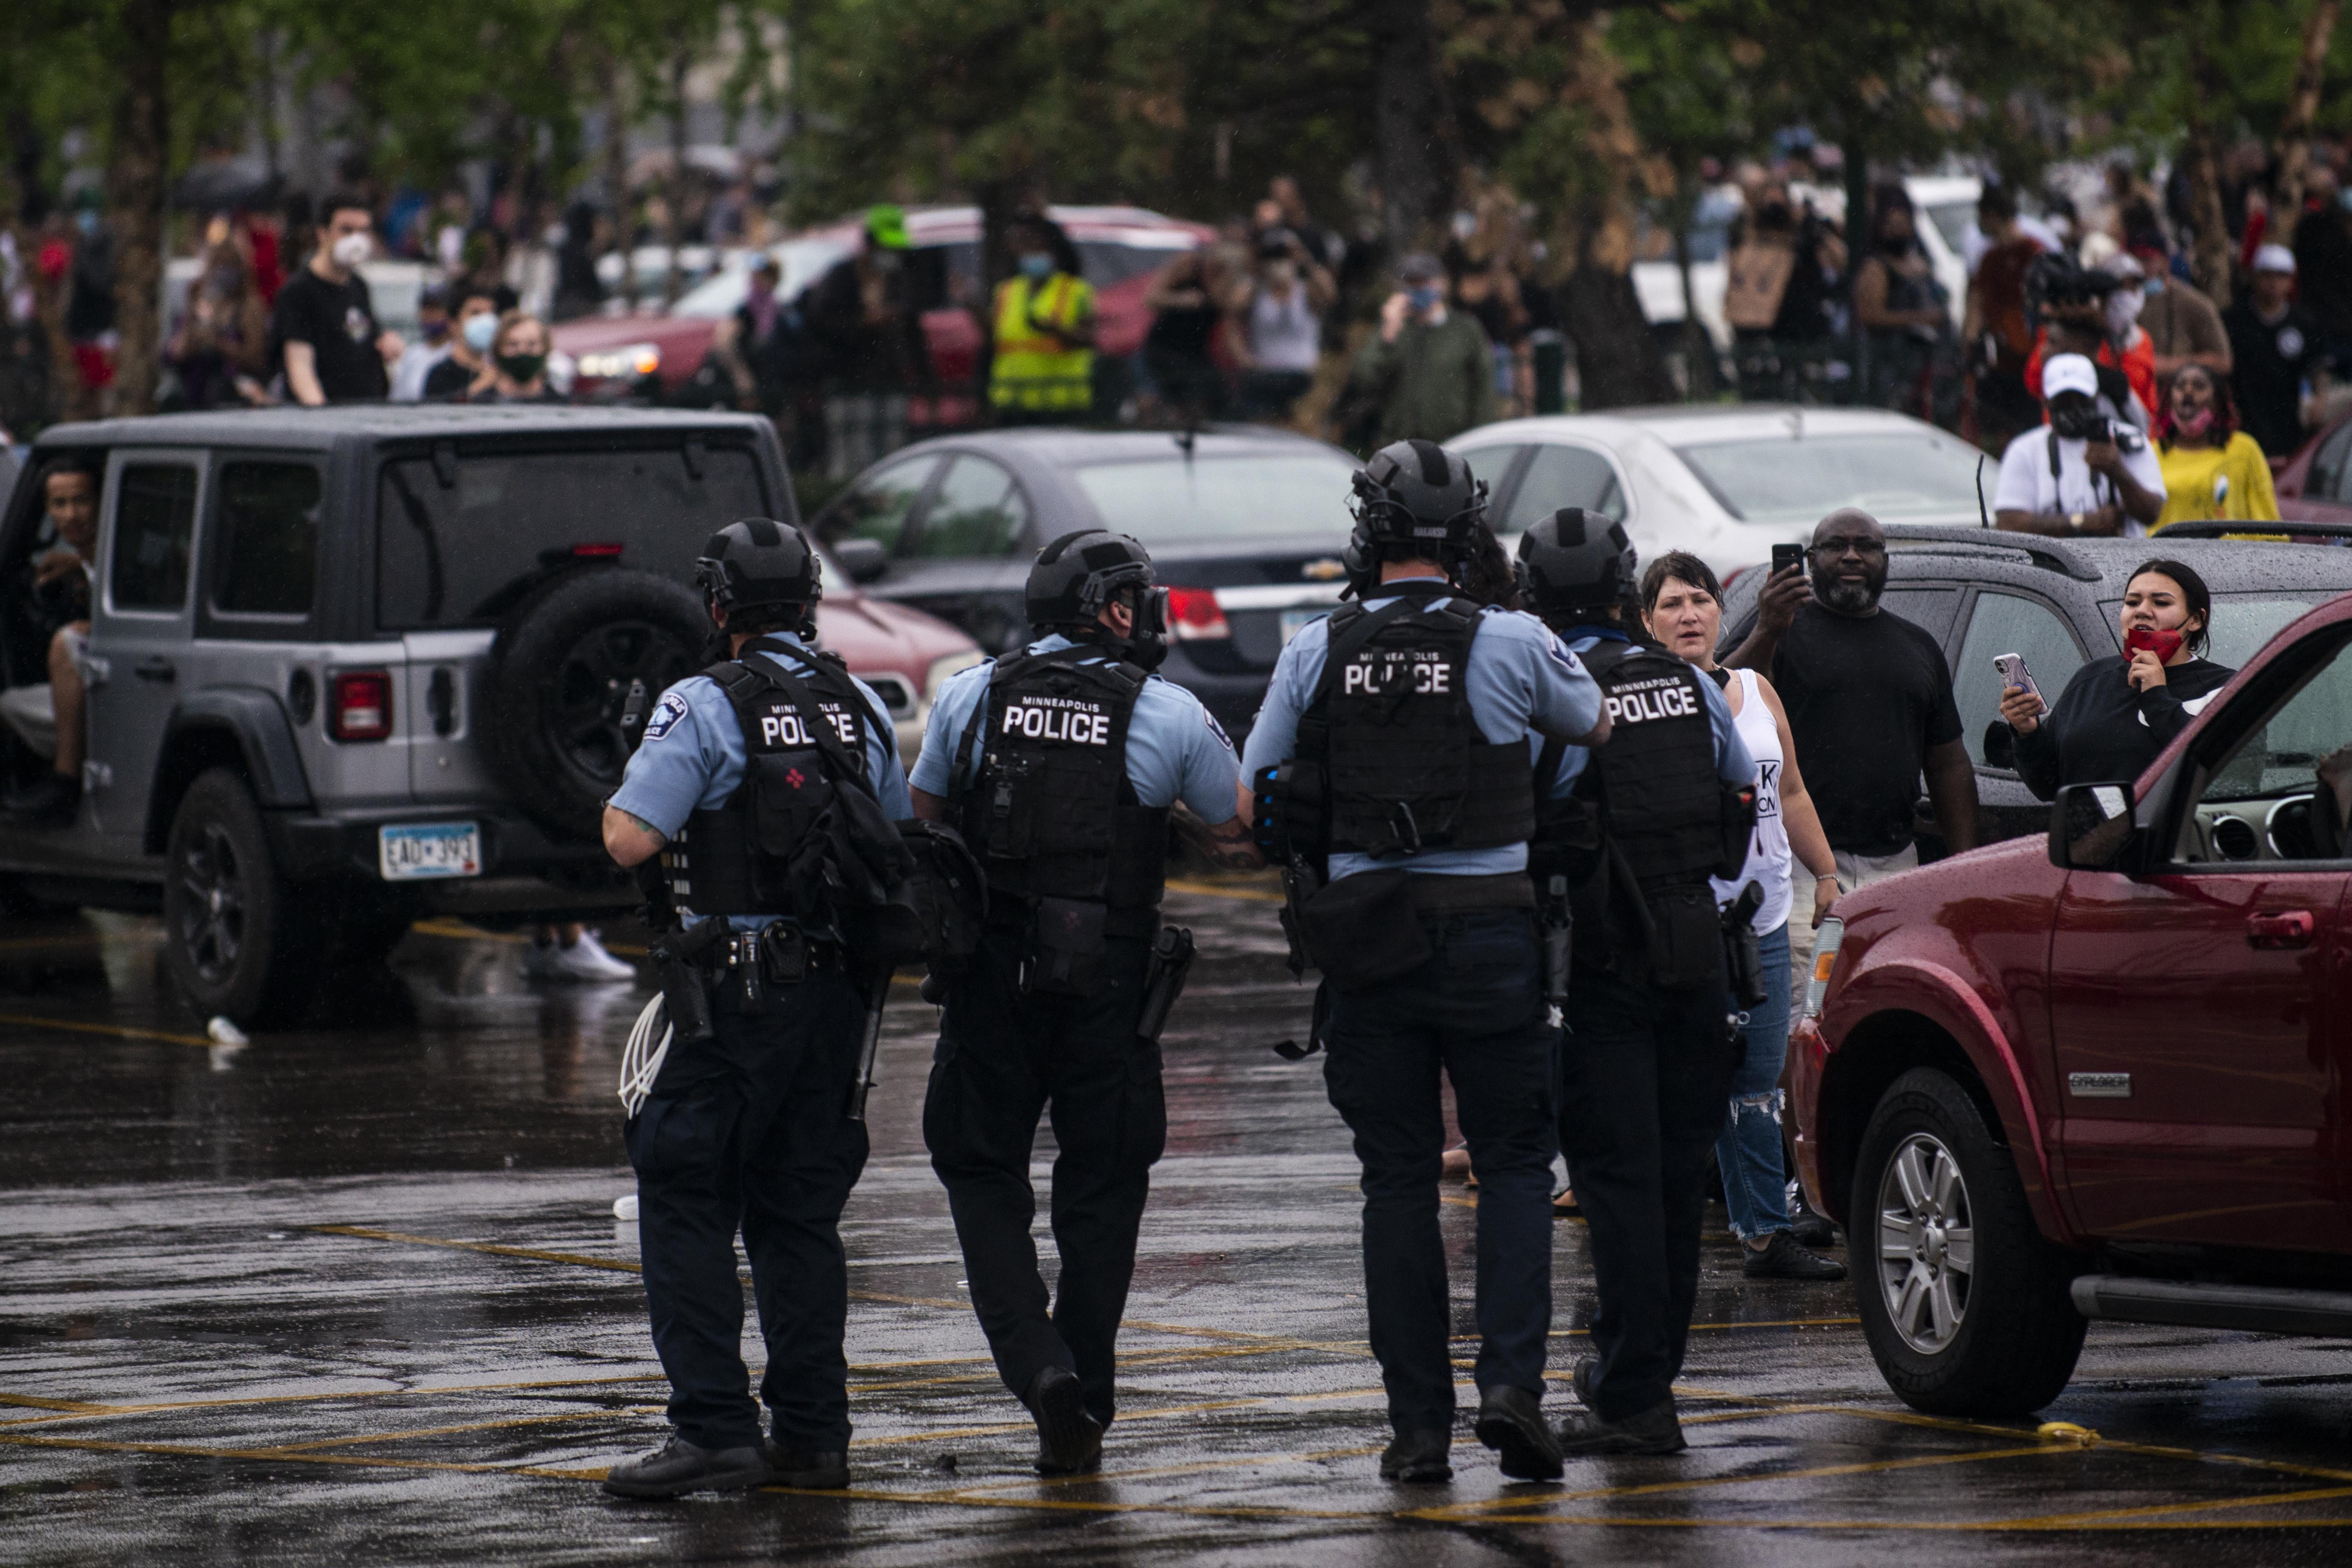 Police wearing tactical gear walk through a parking lot toward a crowd of protesters